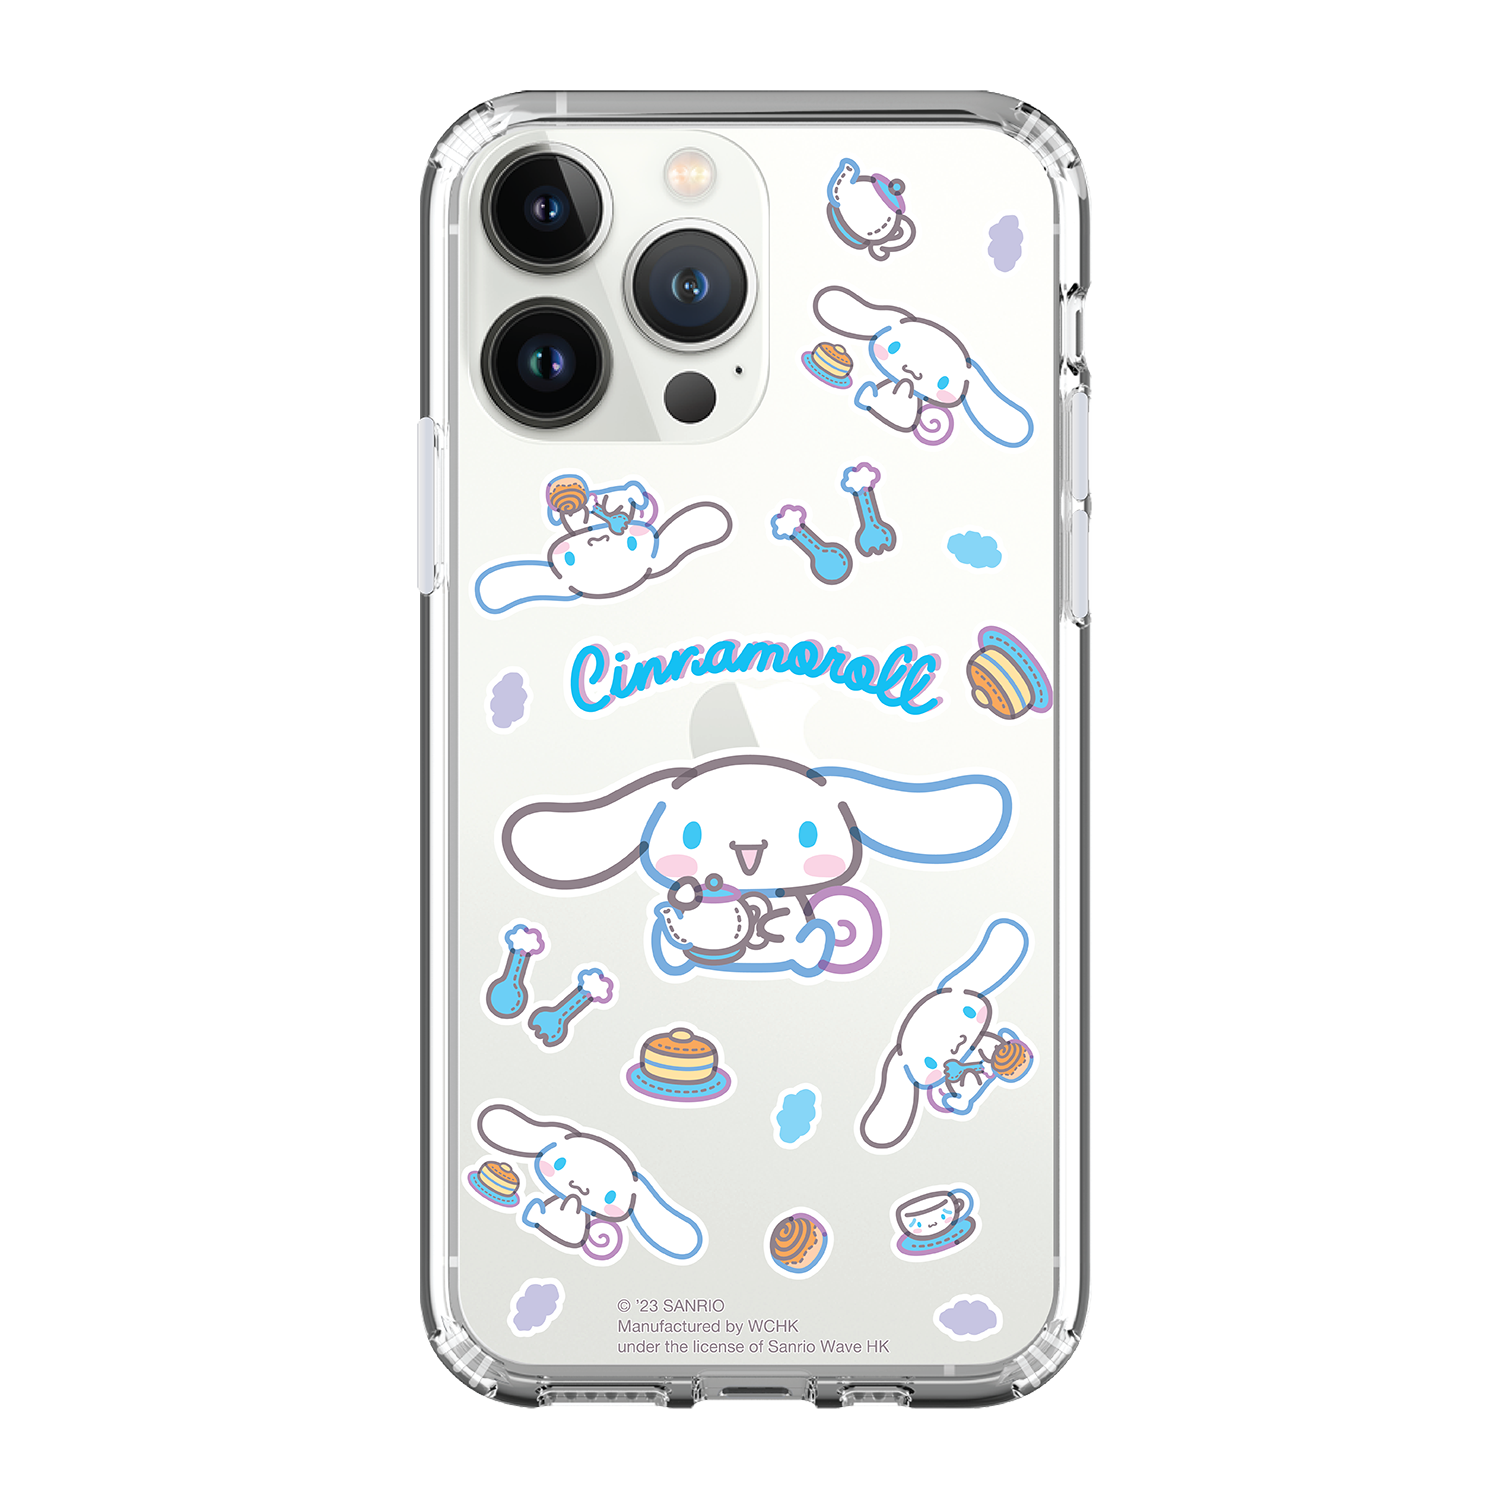 Cinnamoroll Clear Case / iPhone Case / Android Case / Samsung Case 防撞透明手機殼 (CN120)